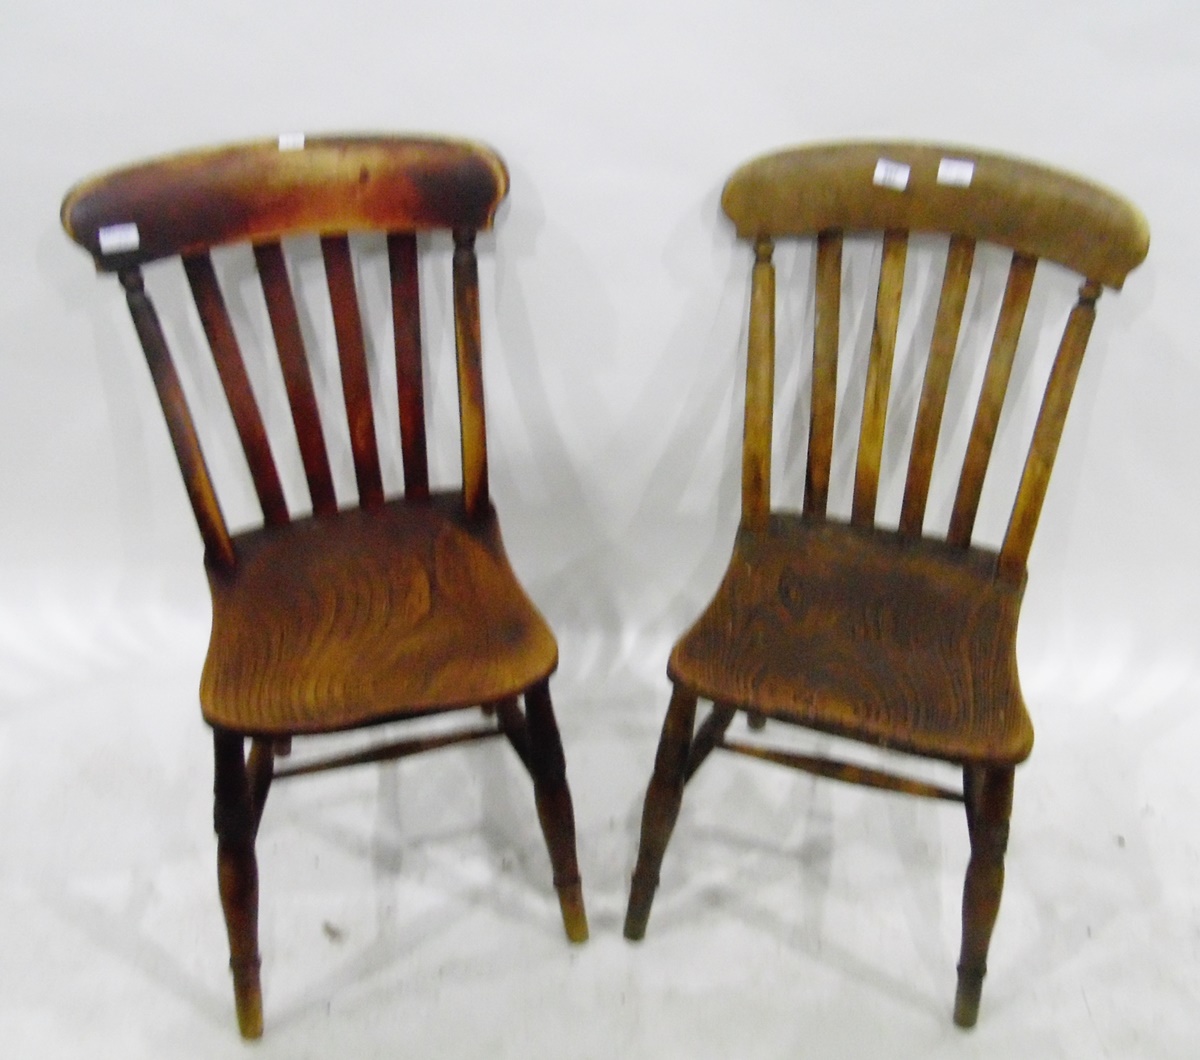 Four beech and elm seated slatback kitchen chairs (4)